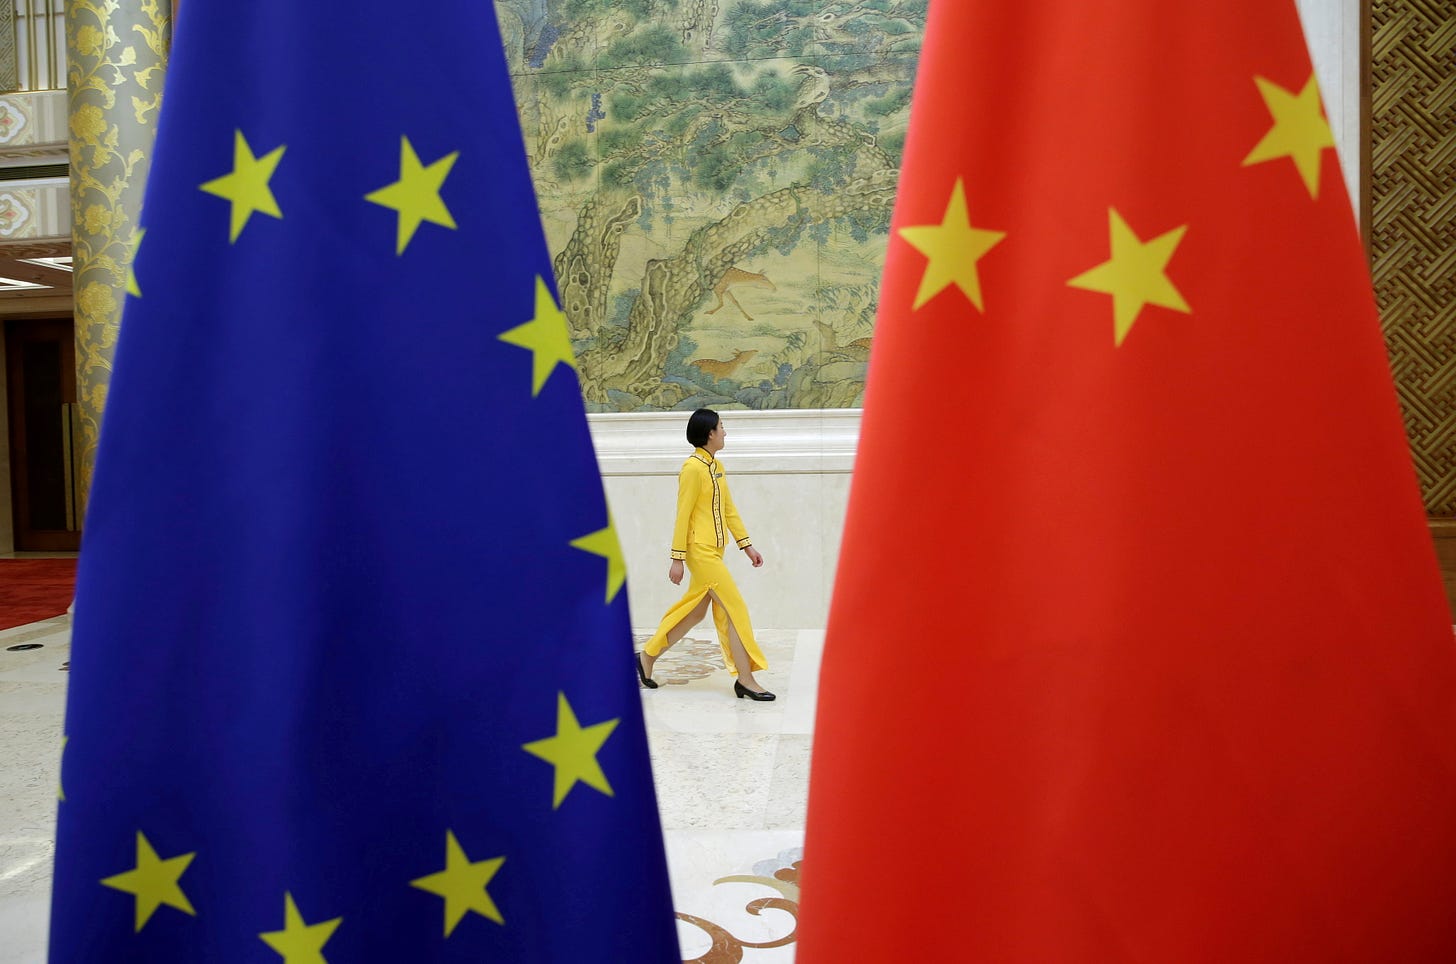 EU, China agree to hold summit, Michel says after Xi call | Reuters